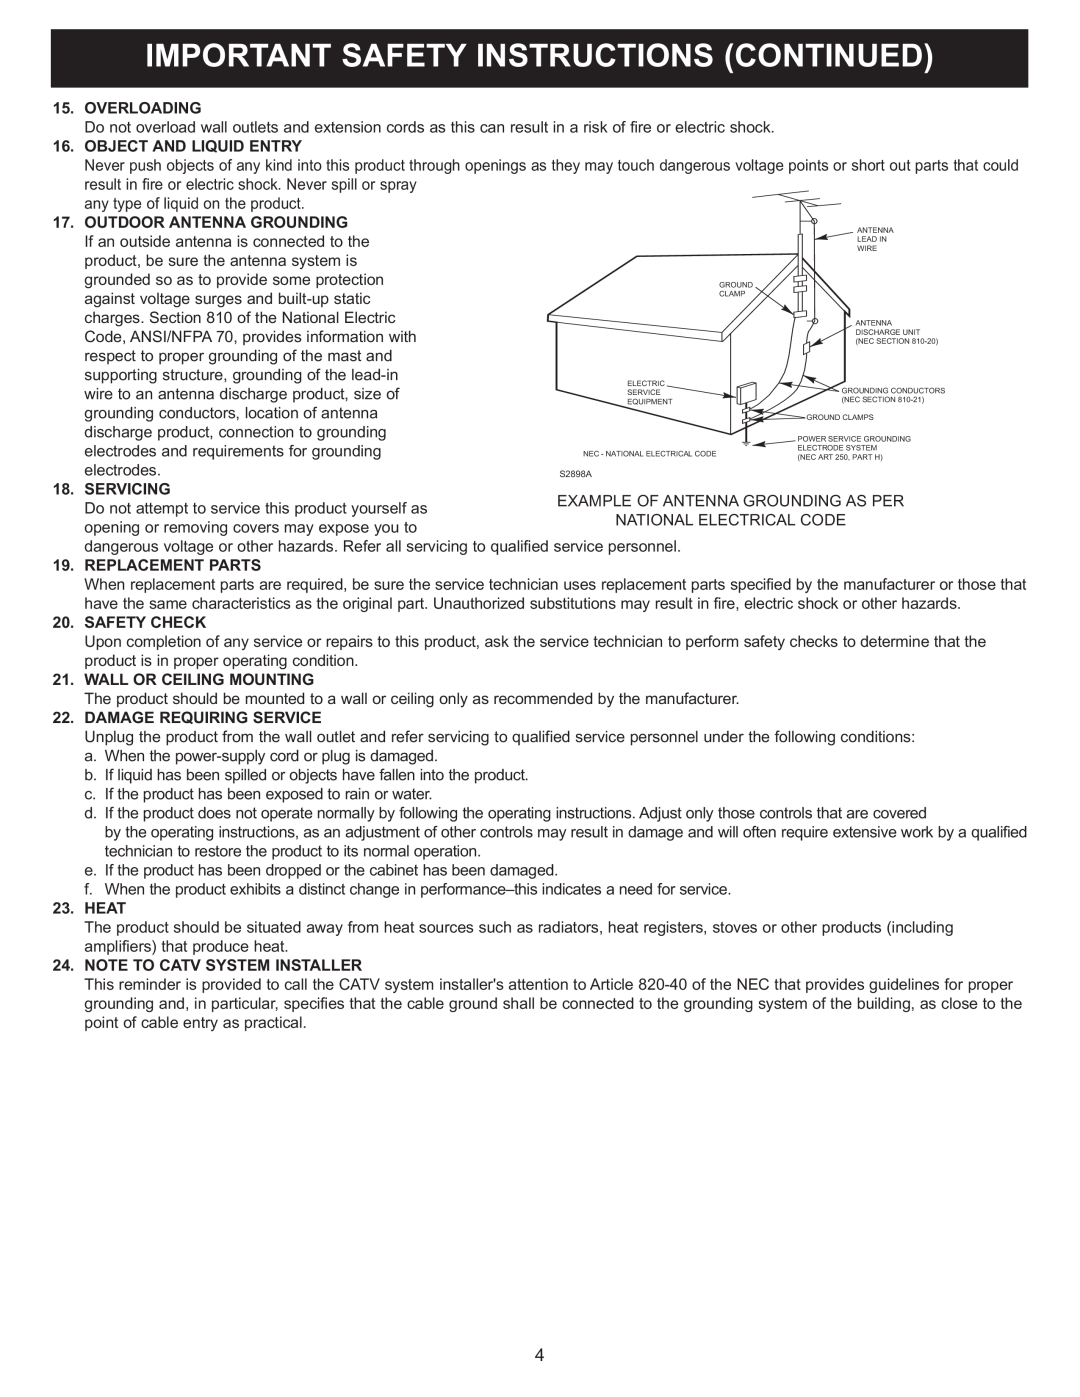 Memorex MT2024 manual Important Safety Instructions Continued 